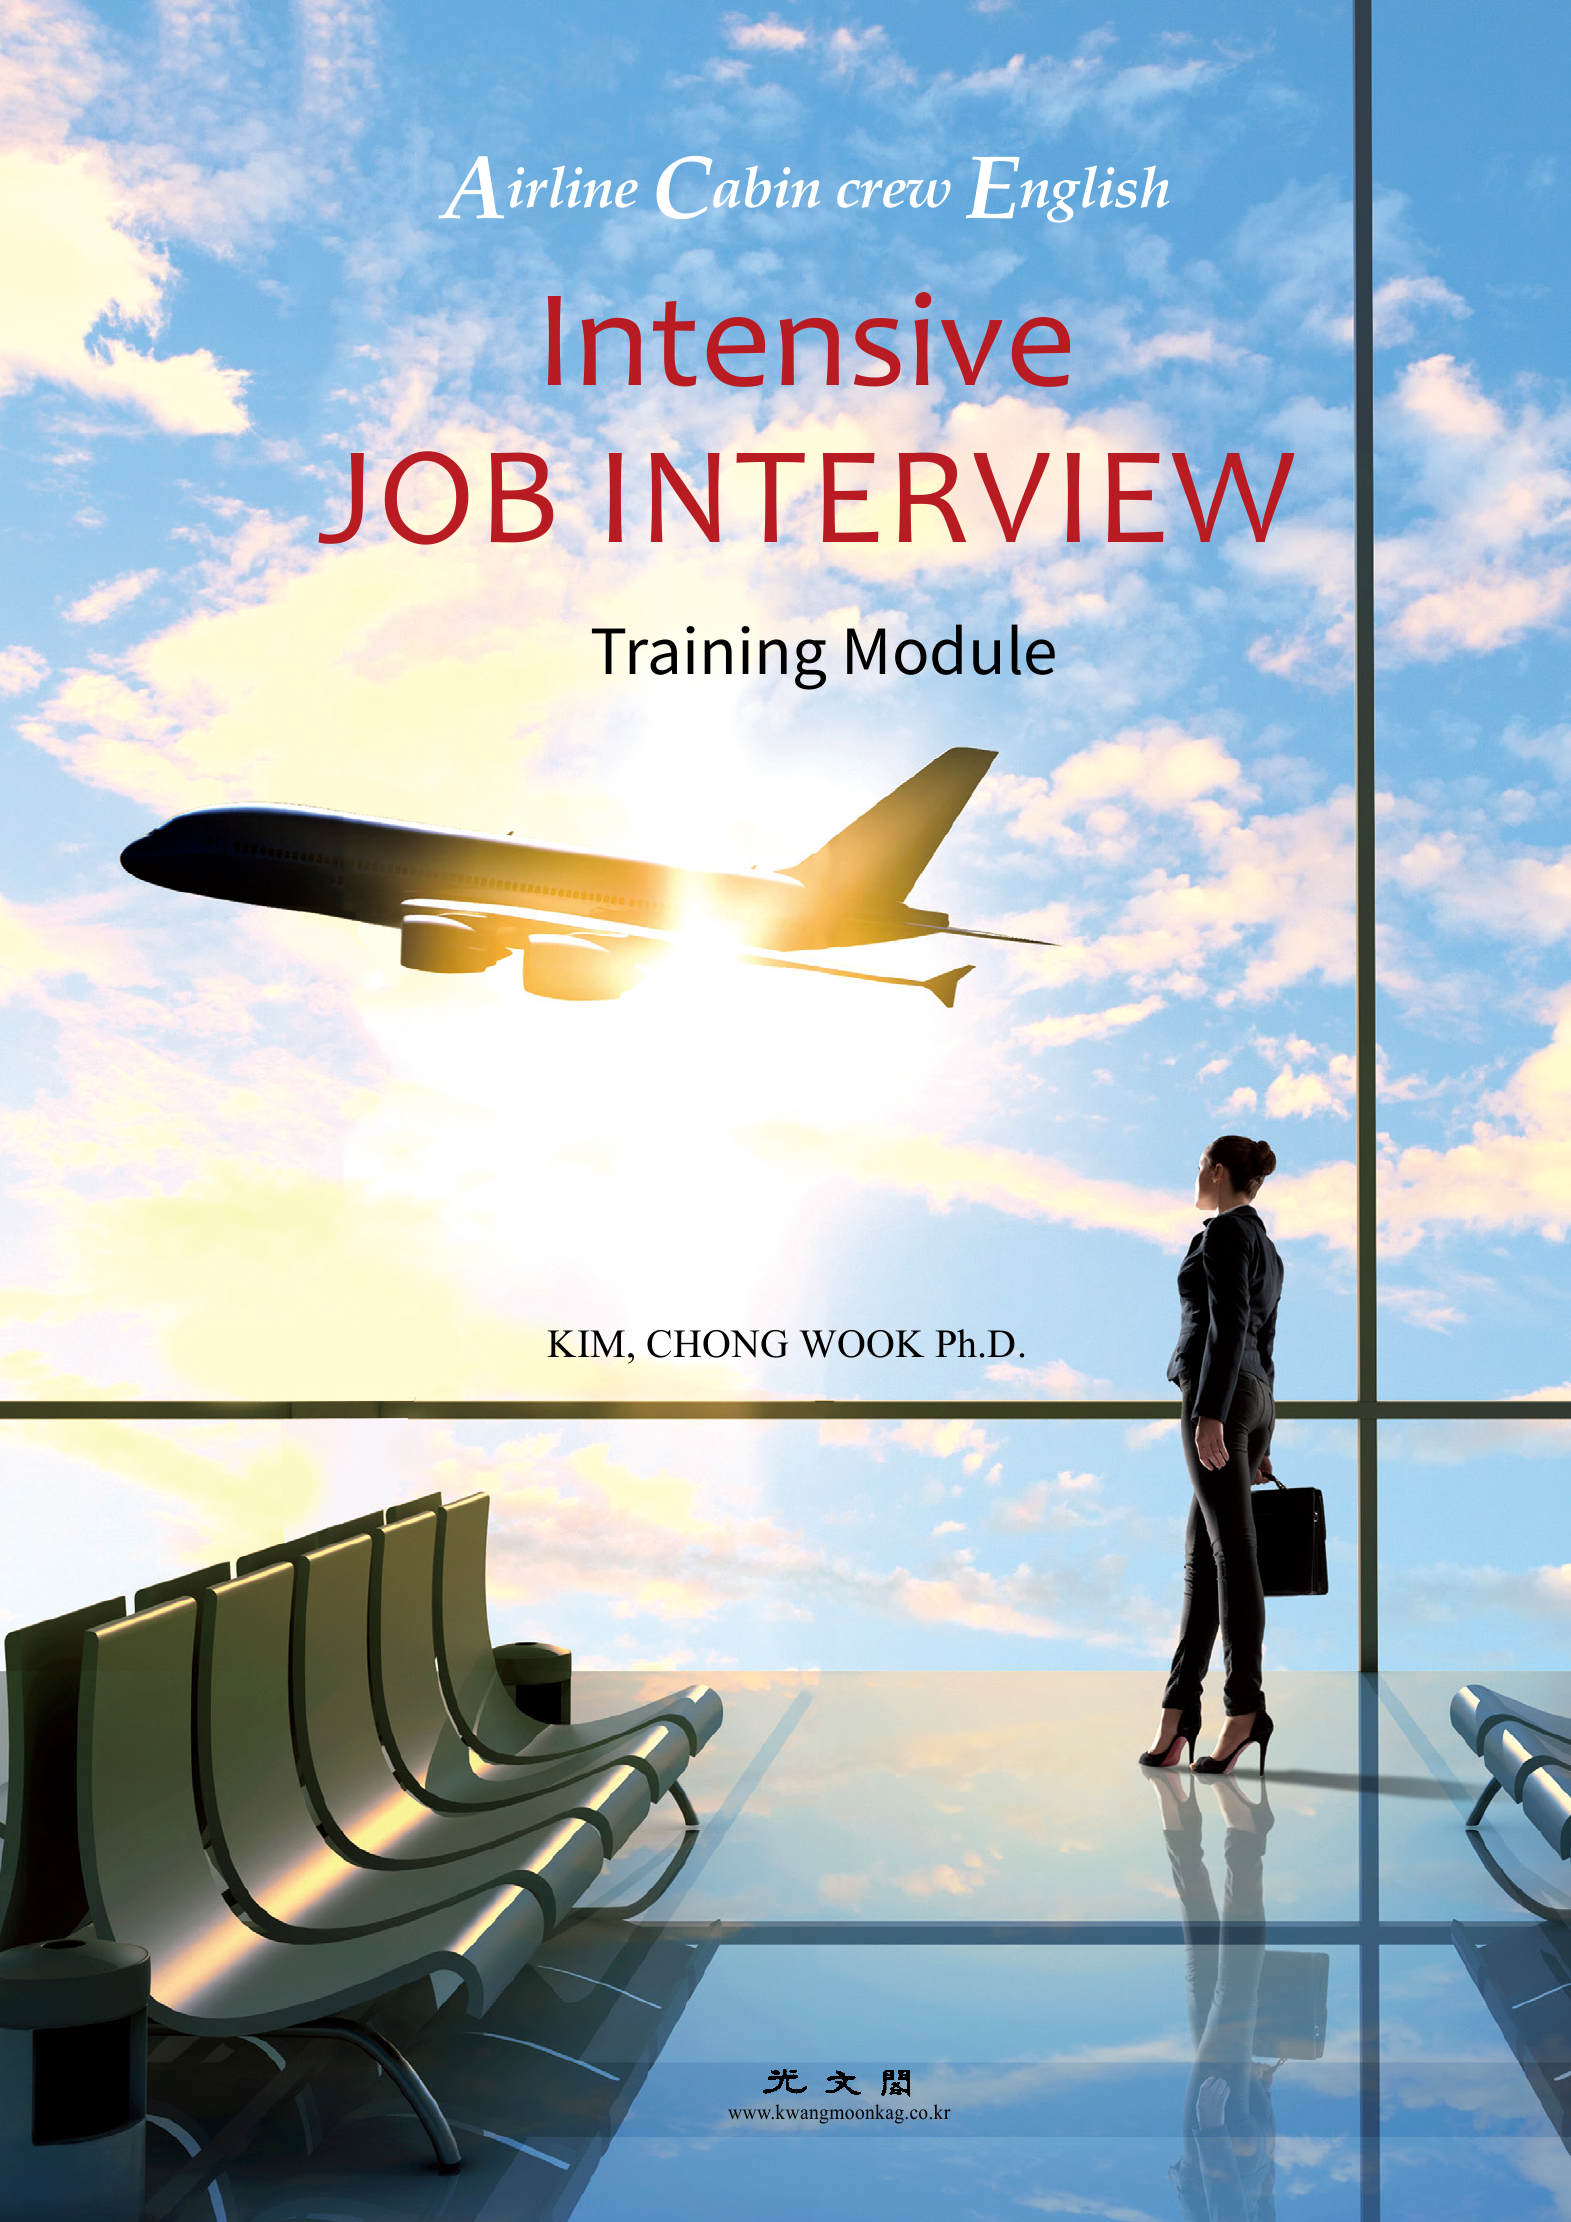 Intensive JOB INTERVIEW(Airline Cabin crew English)